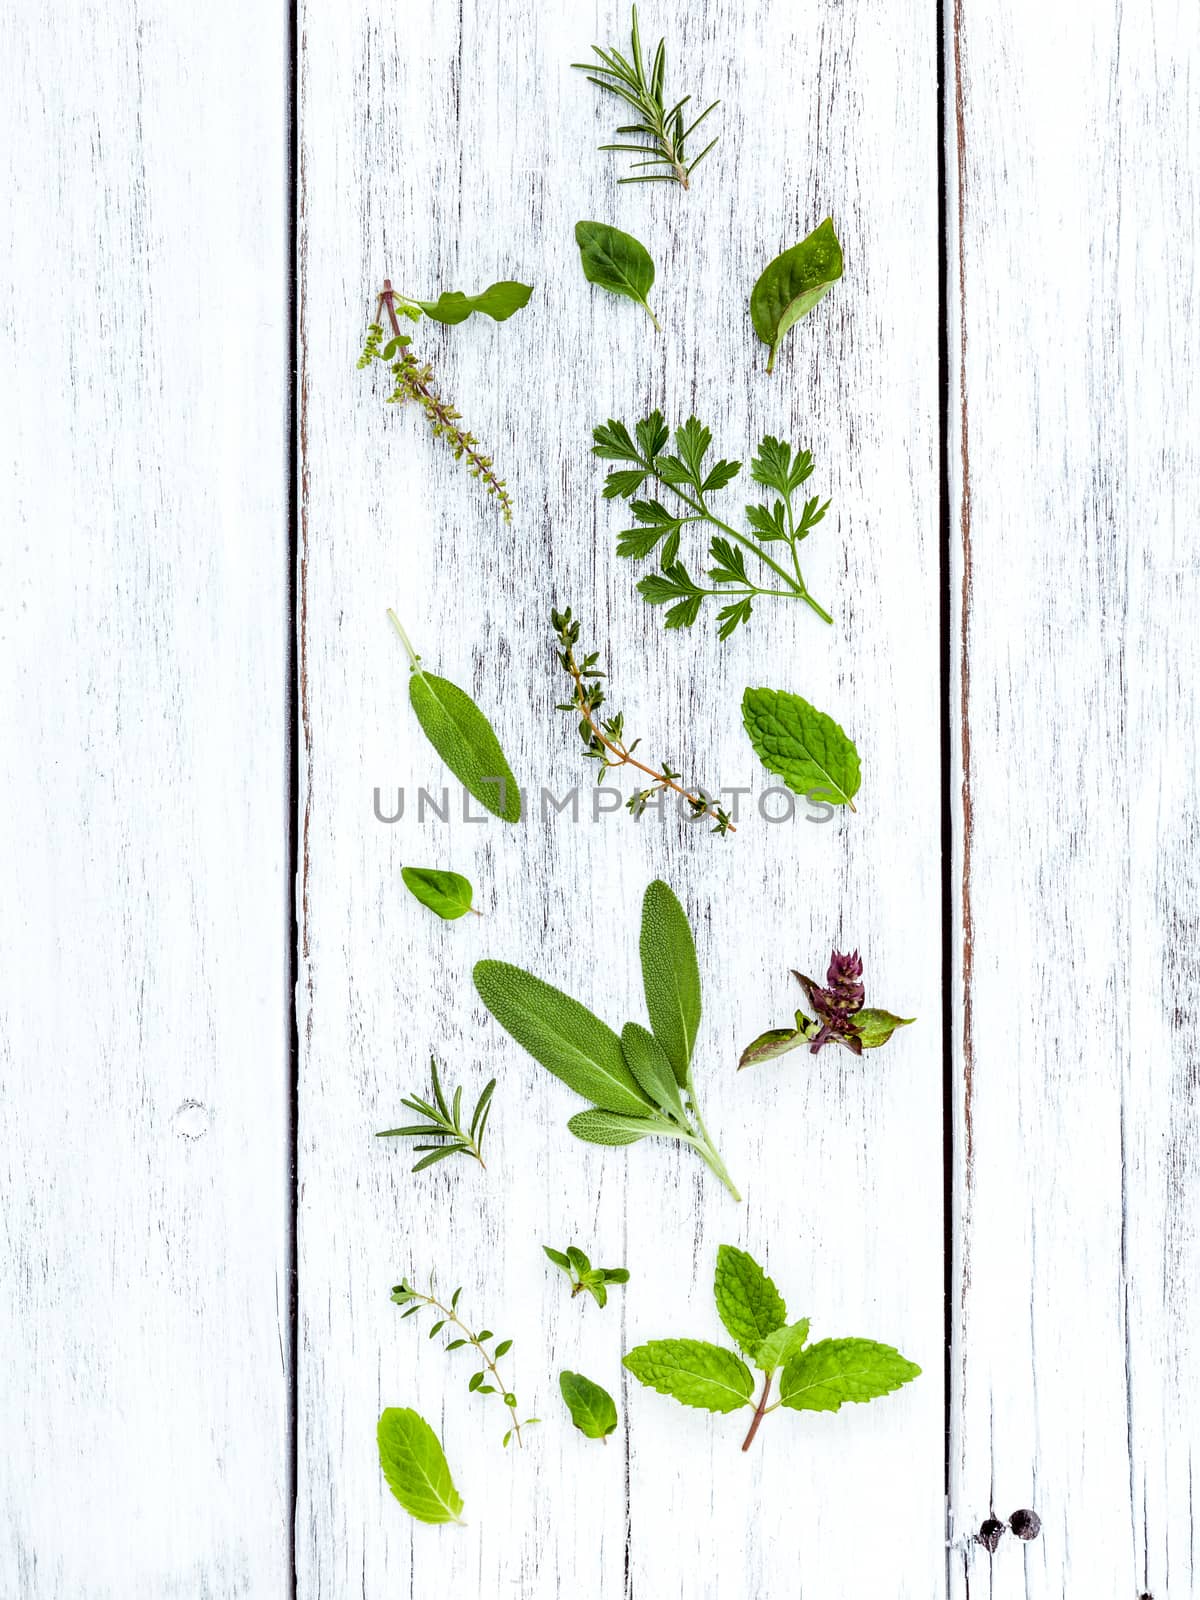 Various fresh herbs from the garden holy basil flower, basil flower,rosemary,oregano, sage,parsley ,thyme and dill over white wooden background.